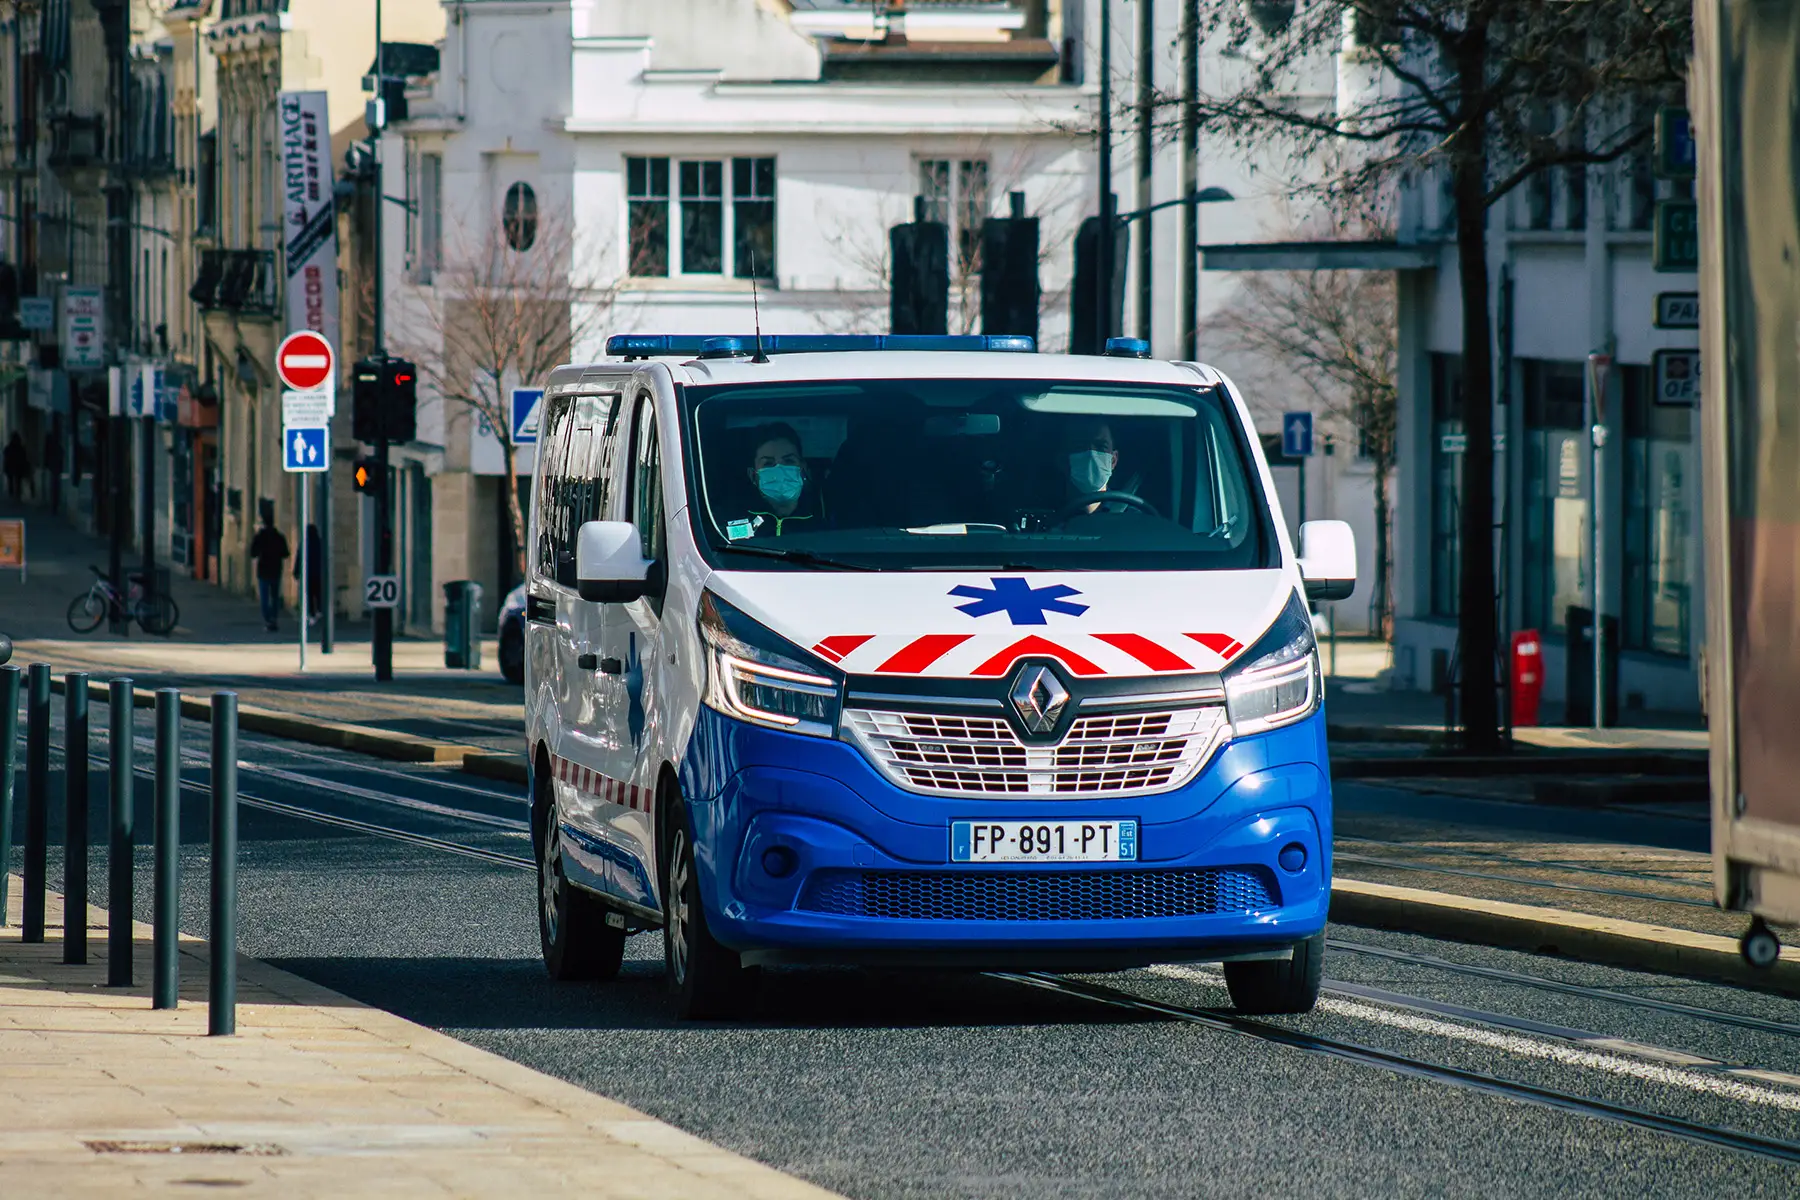 an ambulance driving through the streets of Reims